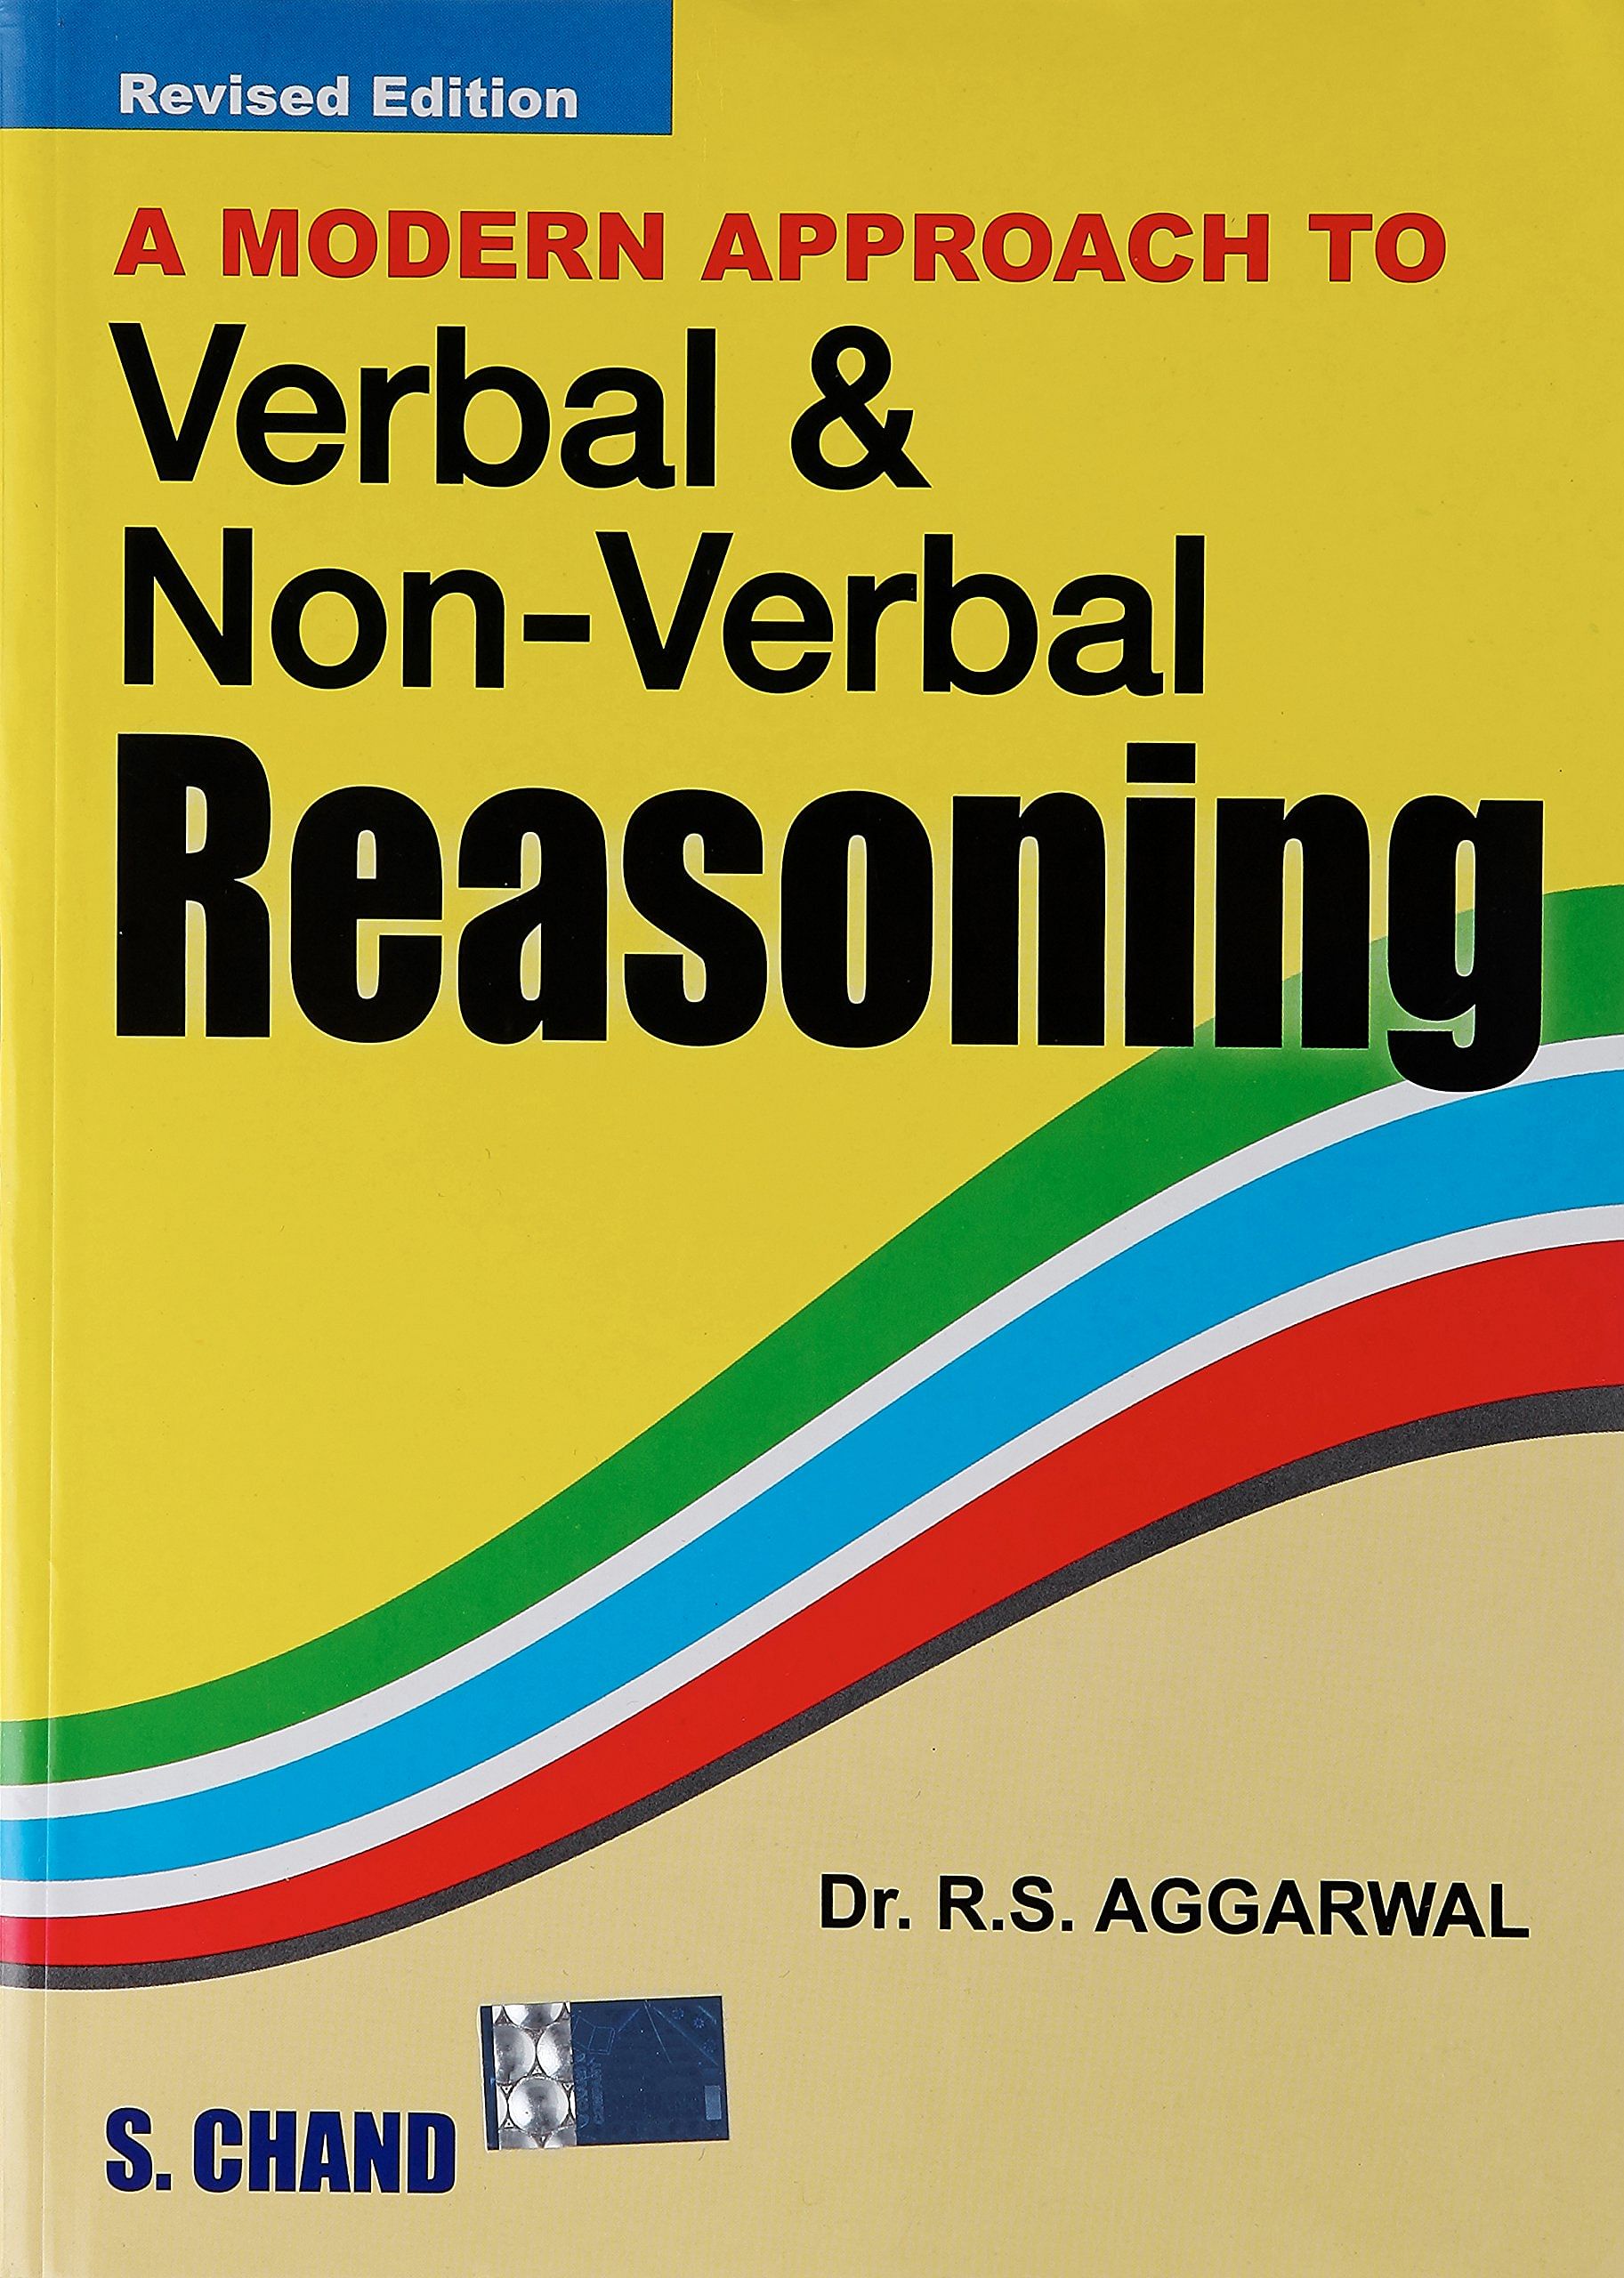 A Modern Approach to Verbal & Non-Verbal Reasoning (Revised Edition)